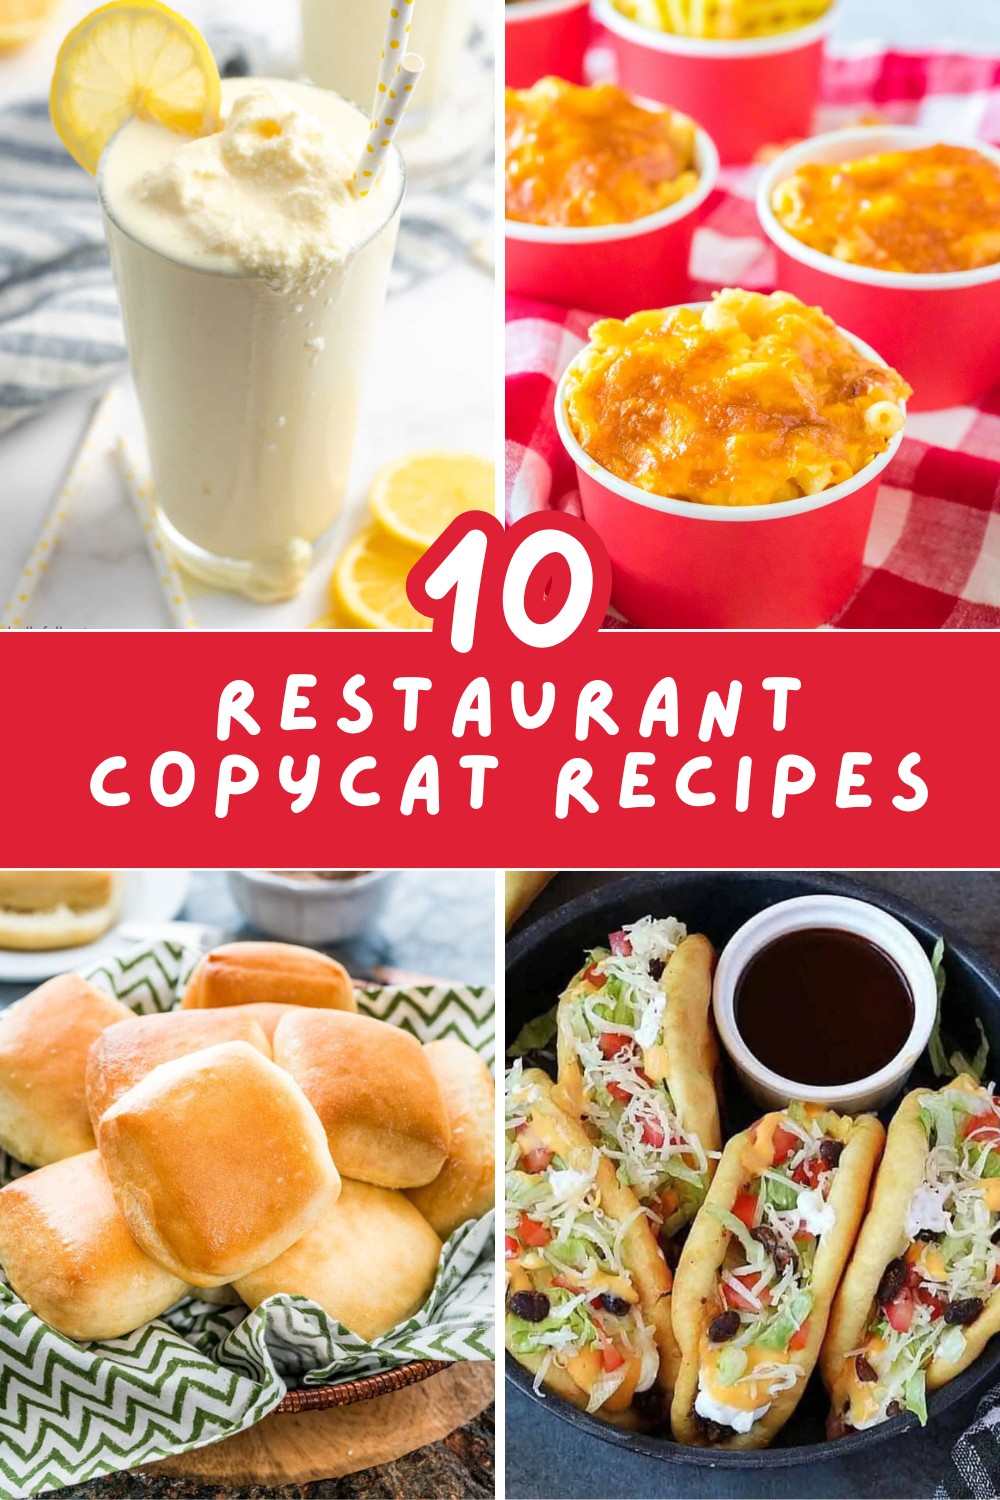 Recreate the magic of your favorite restaurants with these 10 incredible copycat recipes! Make Chick-fil-A’s Frosted Lemonade, Panda Express’s Chow Mein, Texas Roadhouse Rolls, and other beloved dishes easily at home. 🍴🏡 #CookingAtHome #FavoriteDishes